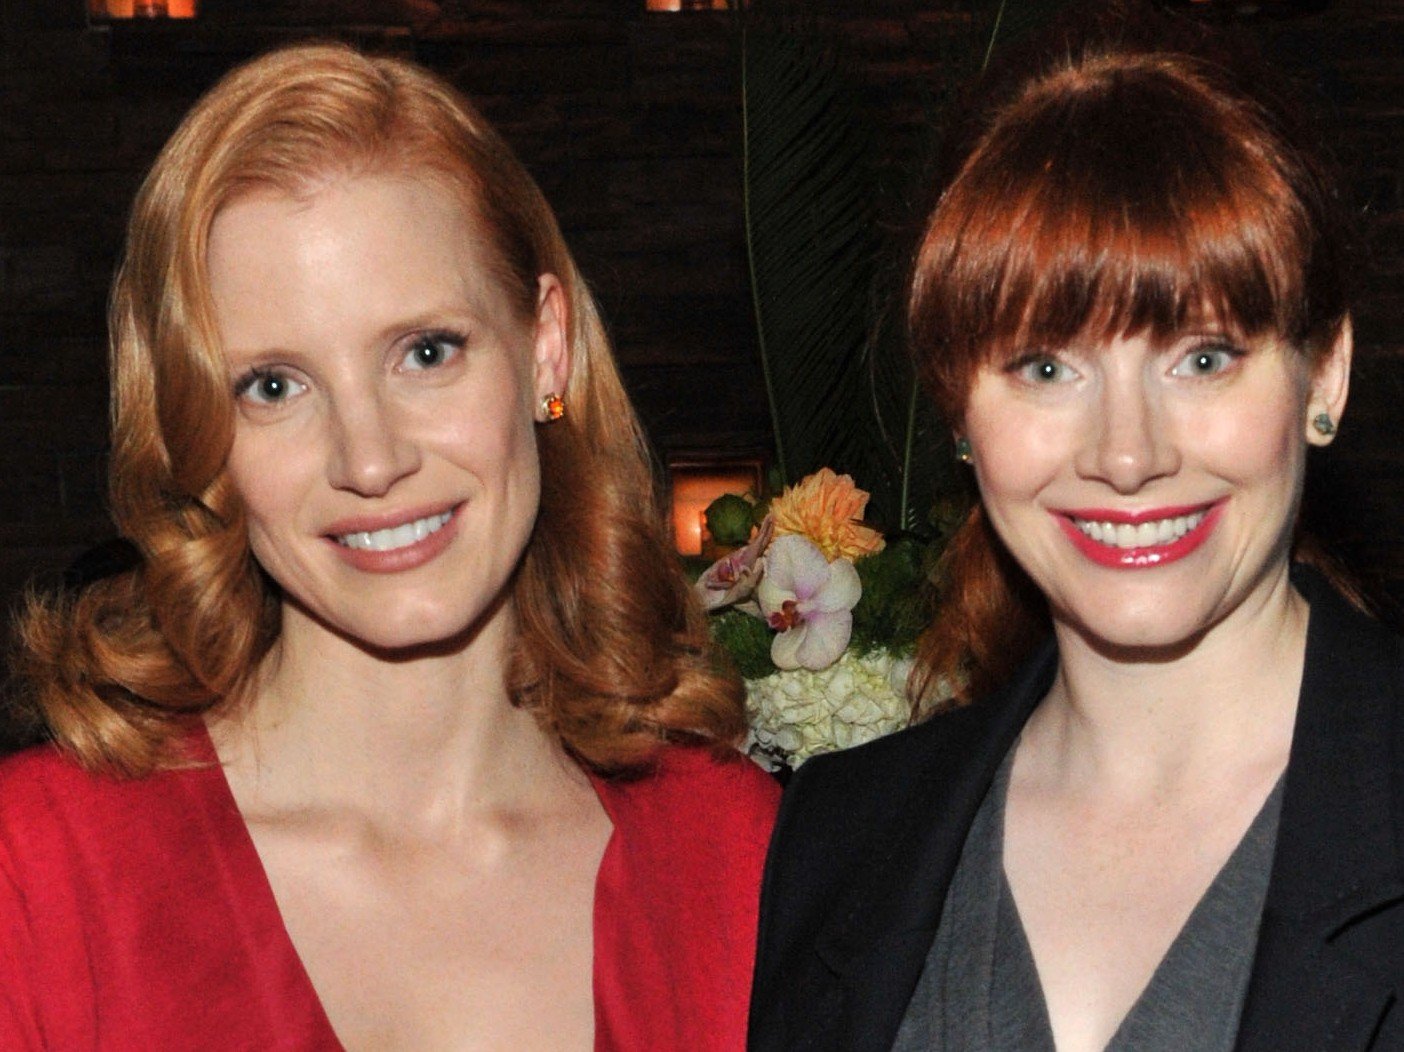 What Makes Bryce Dallas Howard, Jessica Chastain So Different